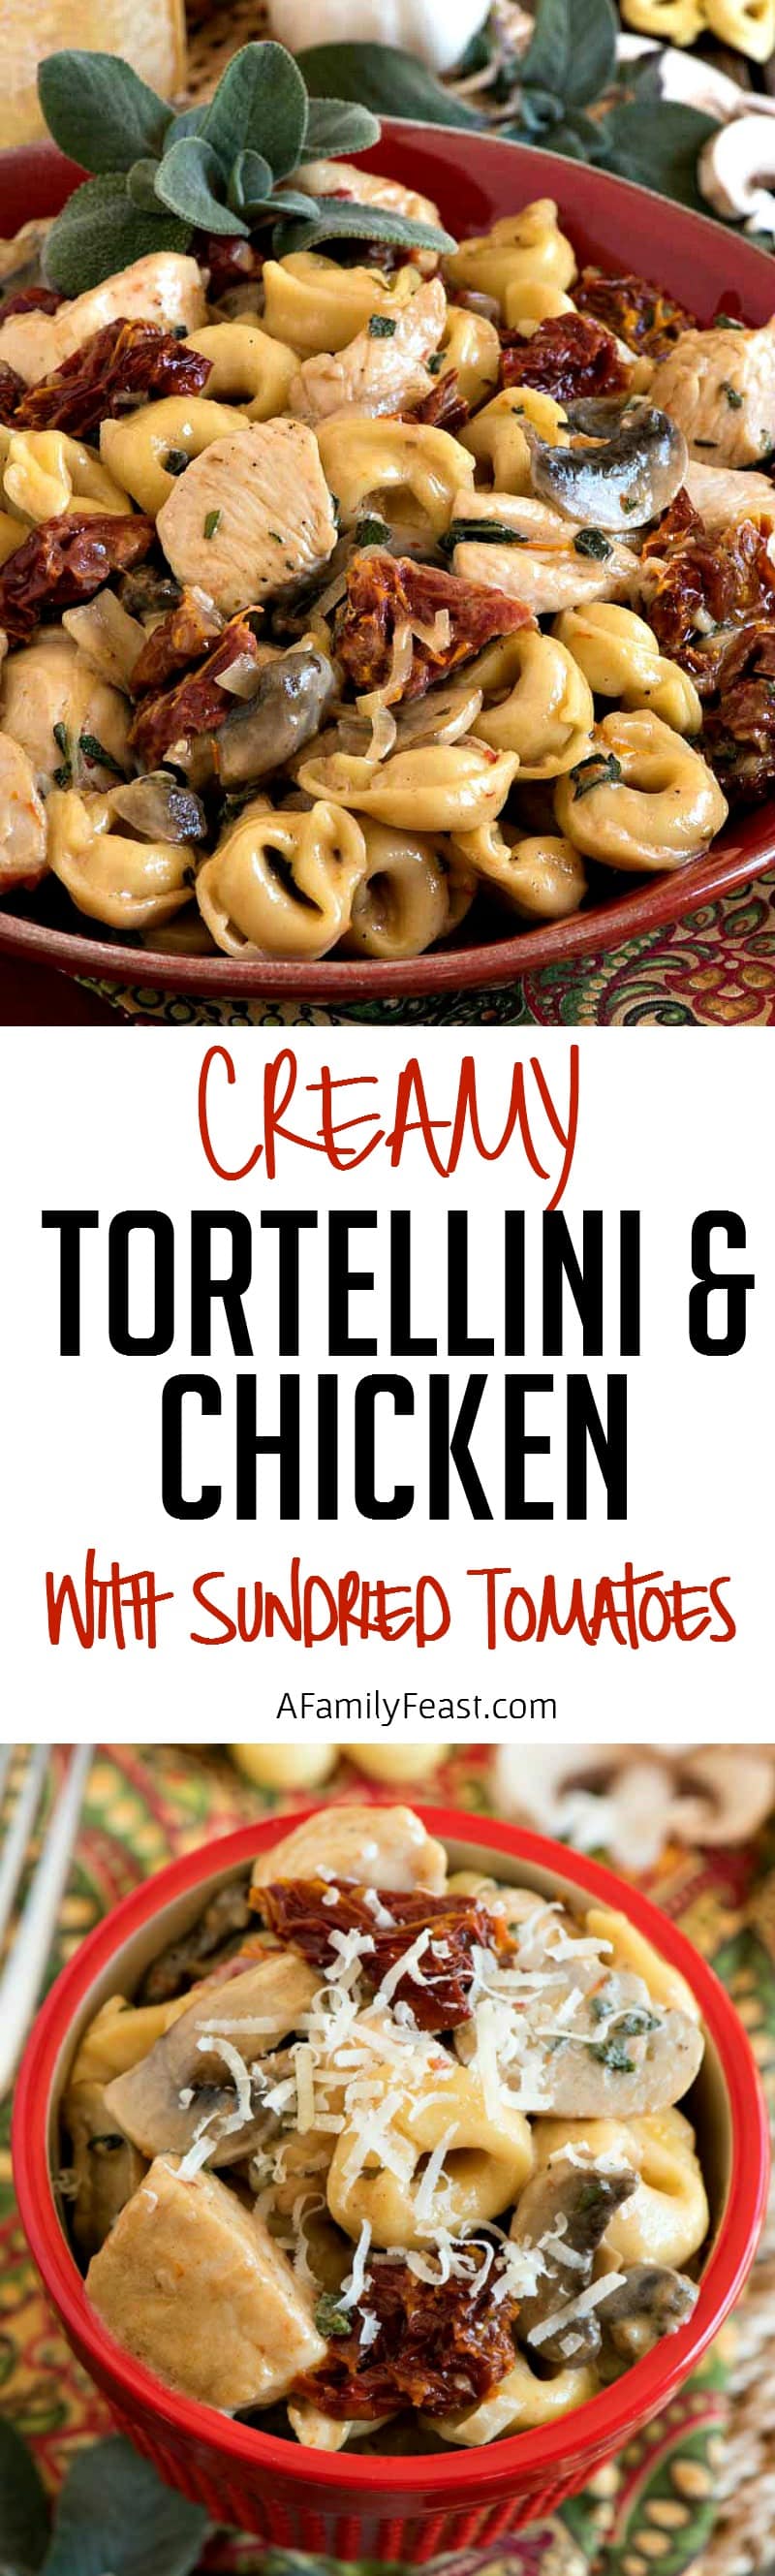 Creamy Tortellini and Chicken with Sun-Dried Tomatoes - A quick and easy meal made with pantry ingredients.